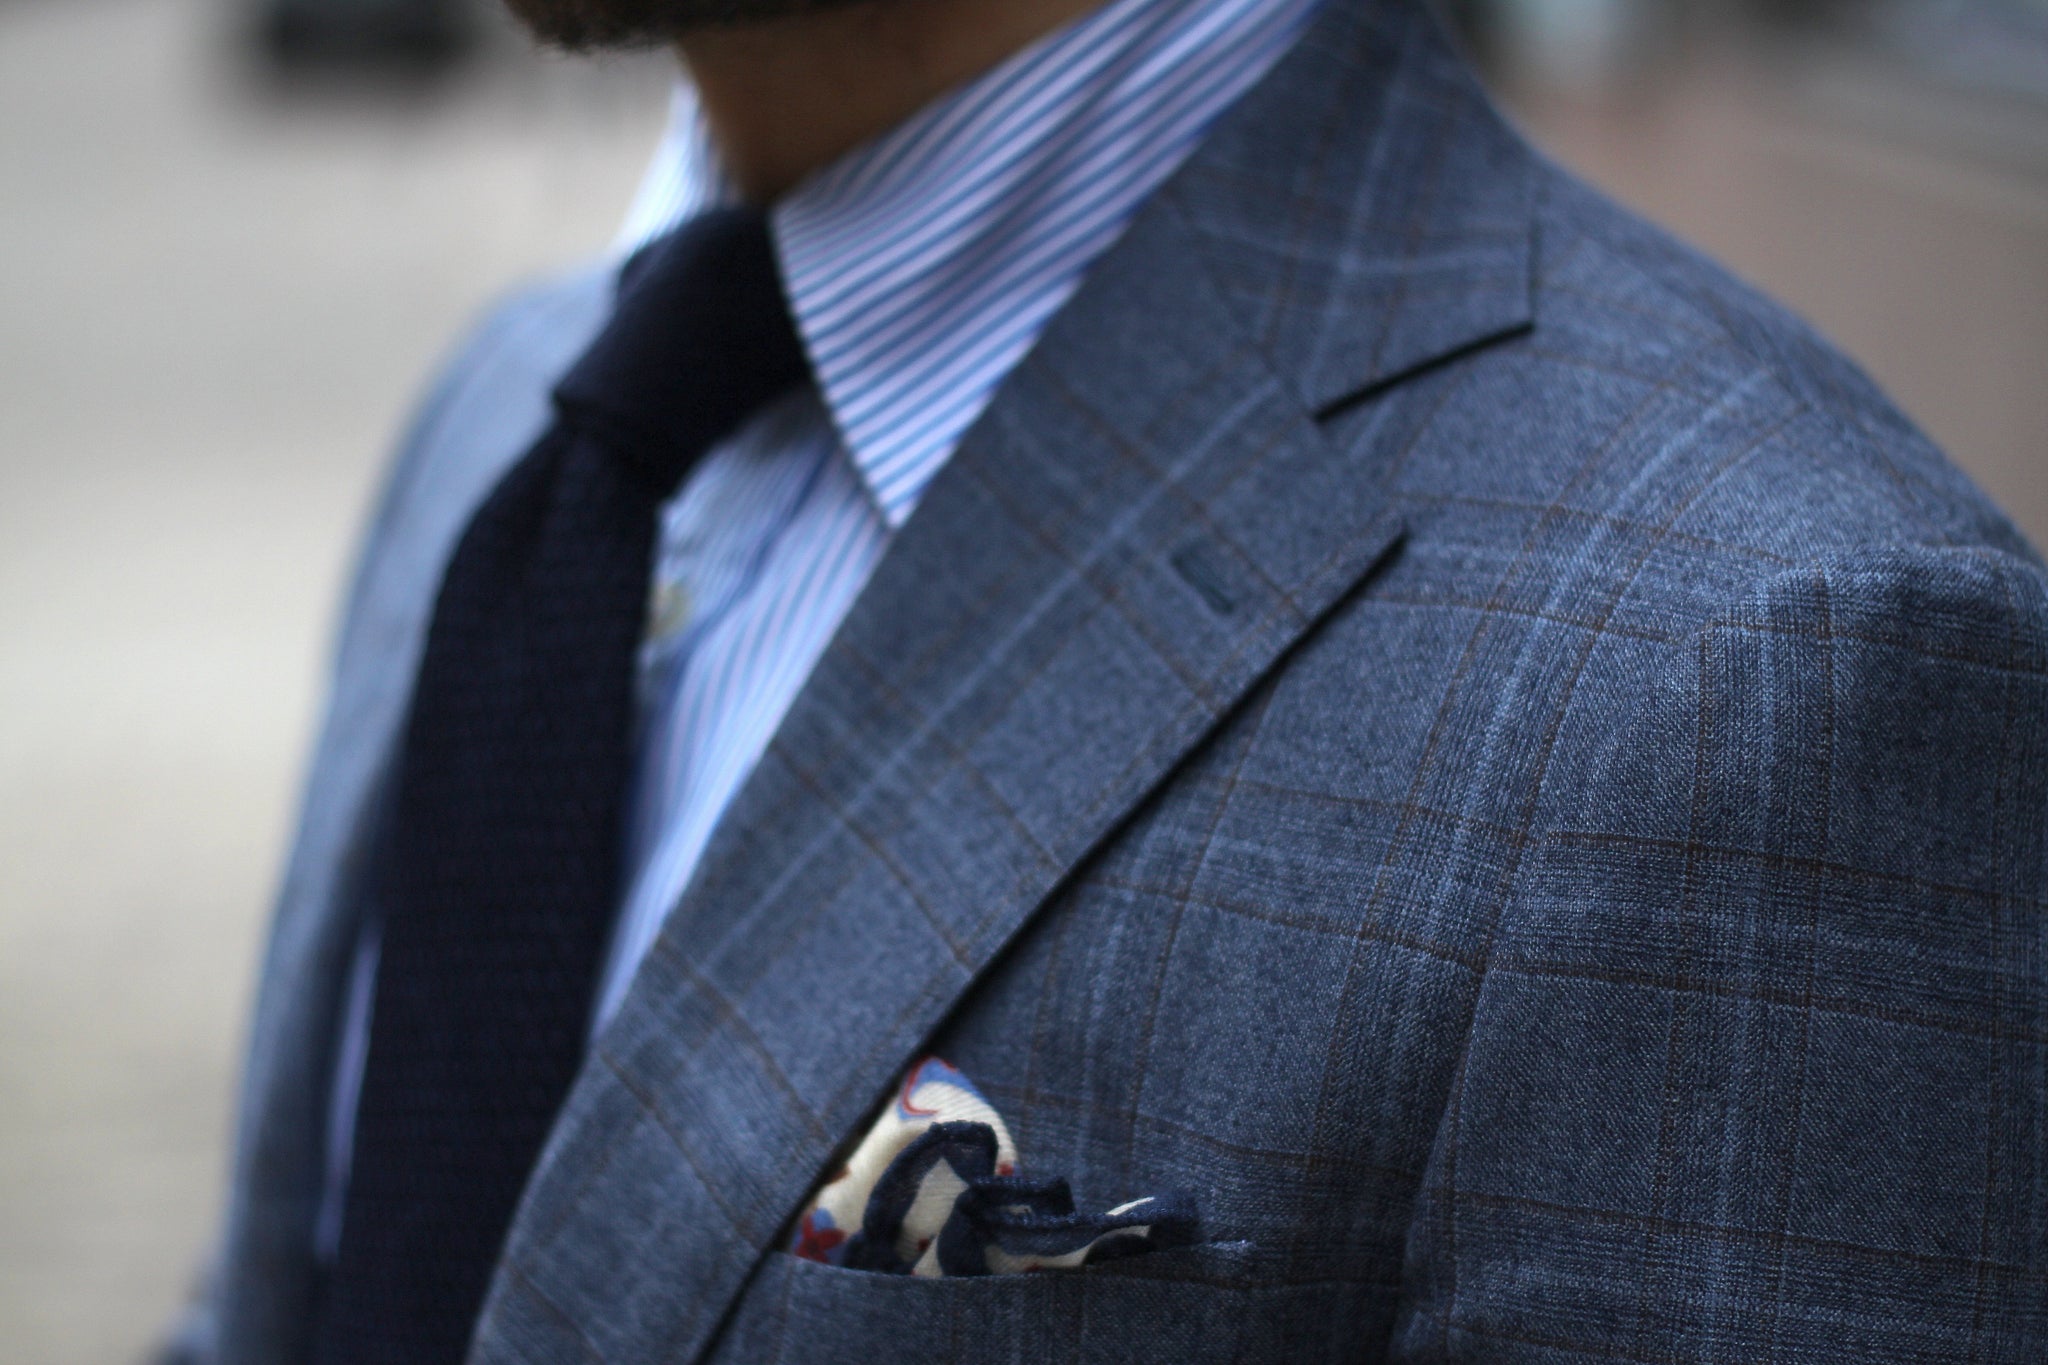 Checked suit - easy to dress up and down